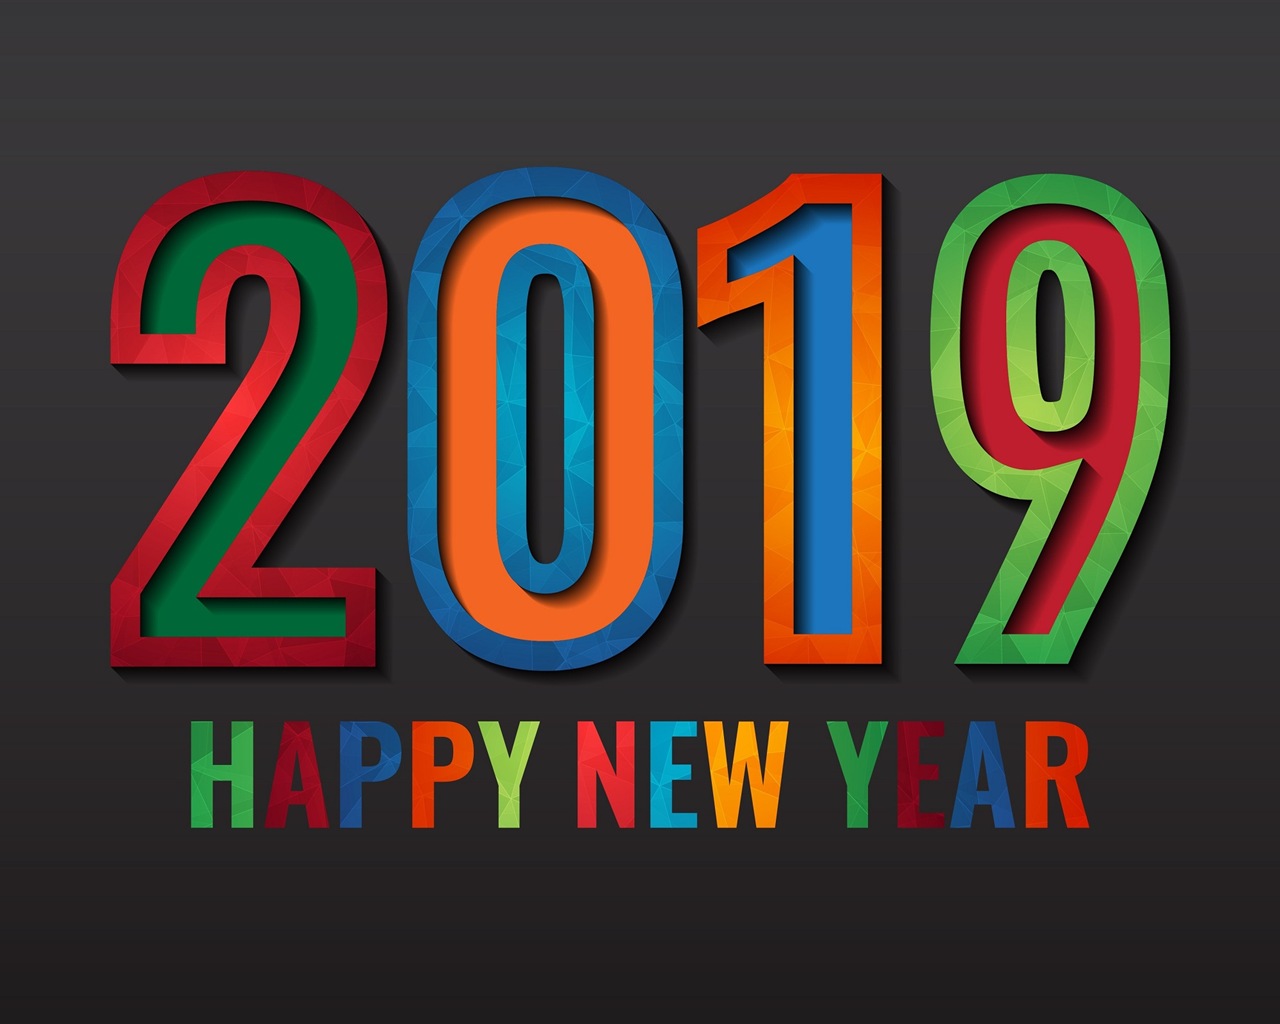 Happy New Year 2019 HD wallpapers #6 - 1280x1024